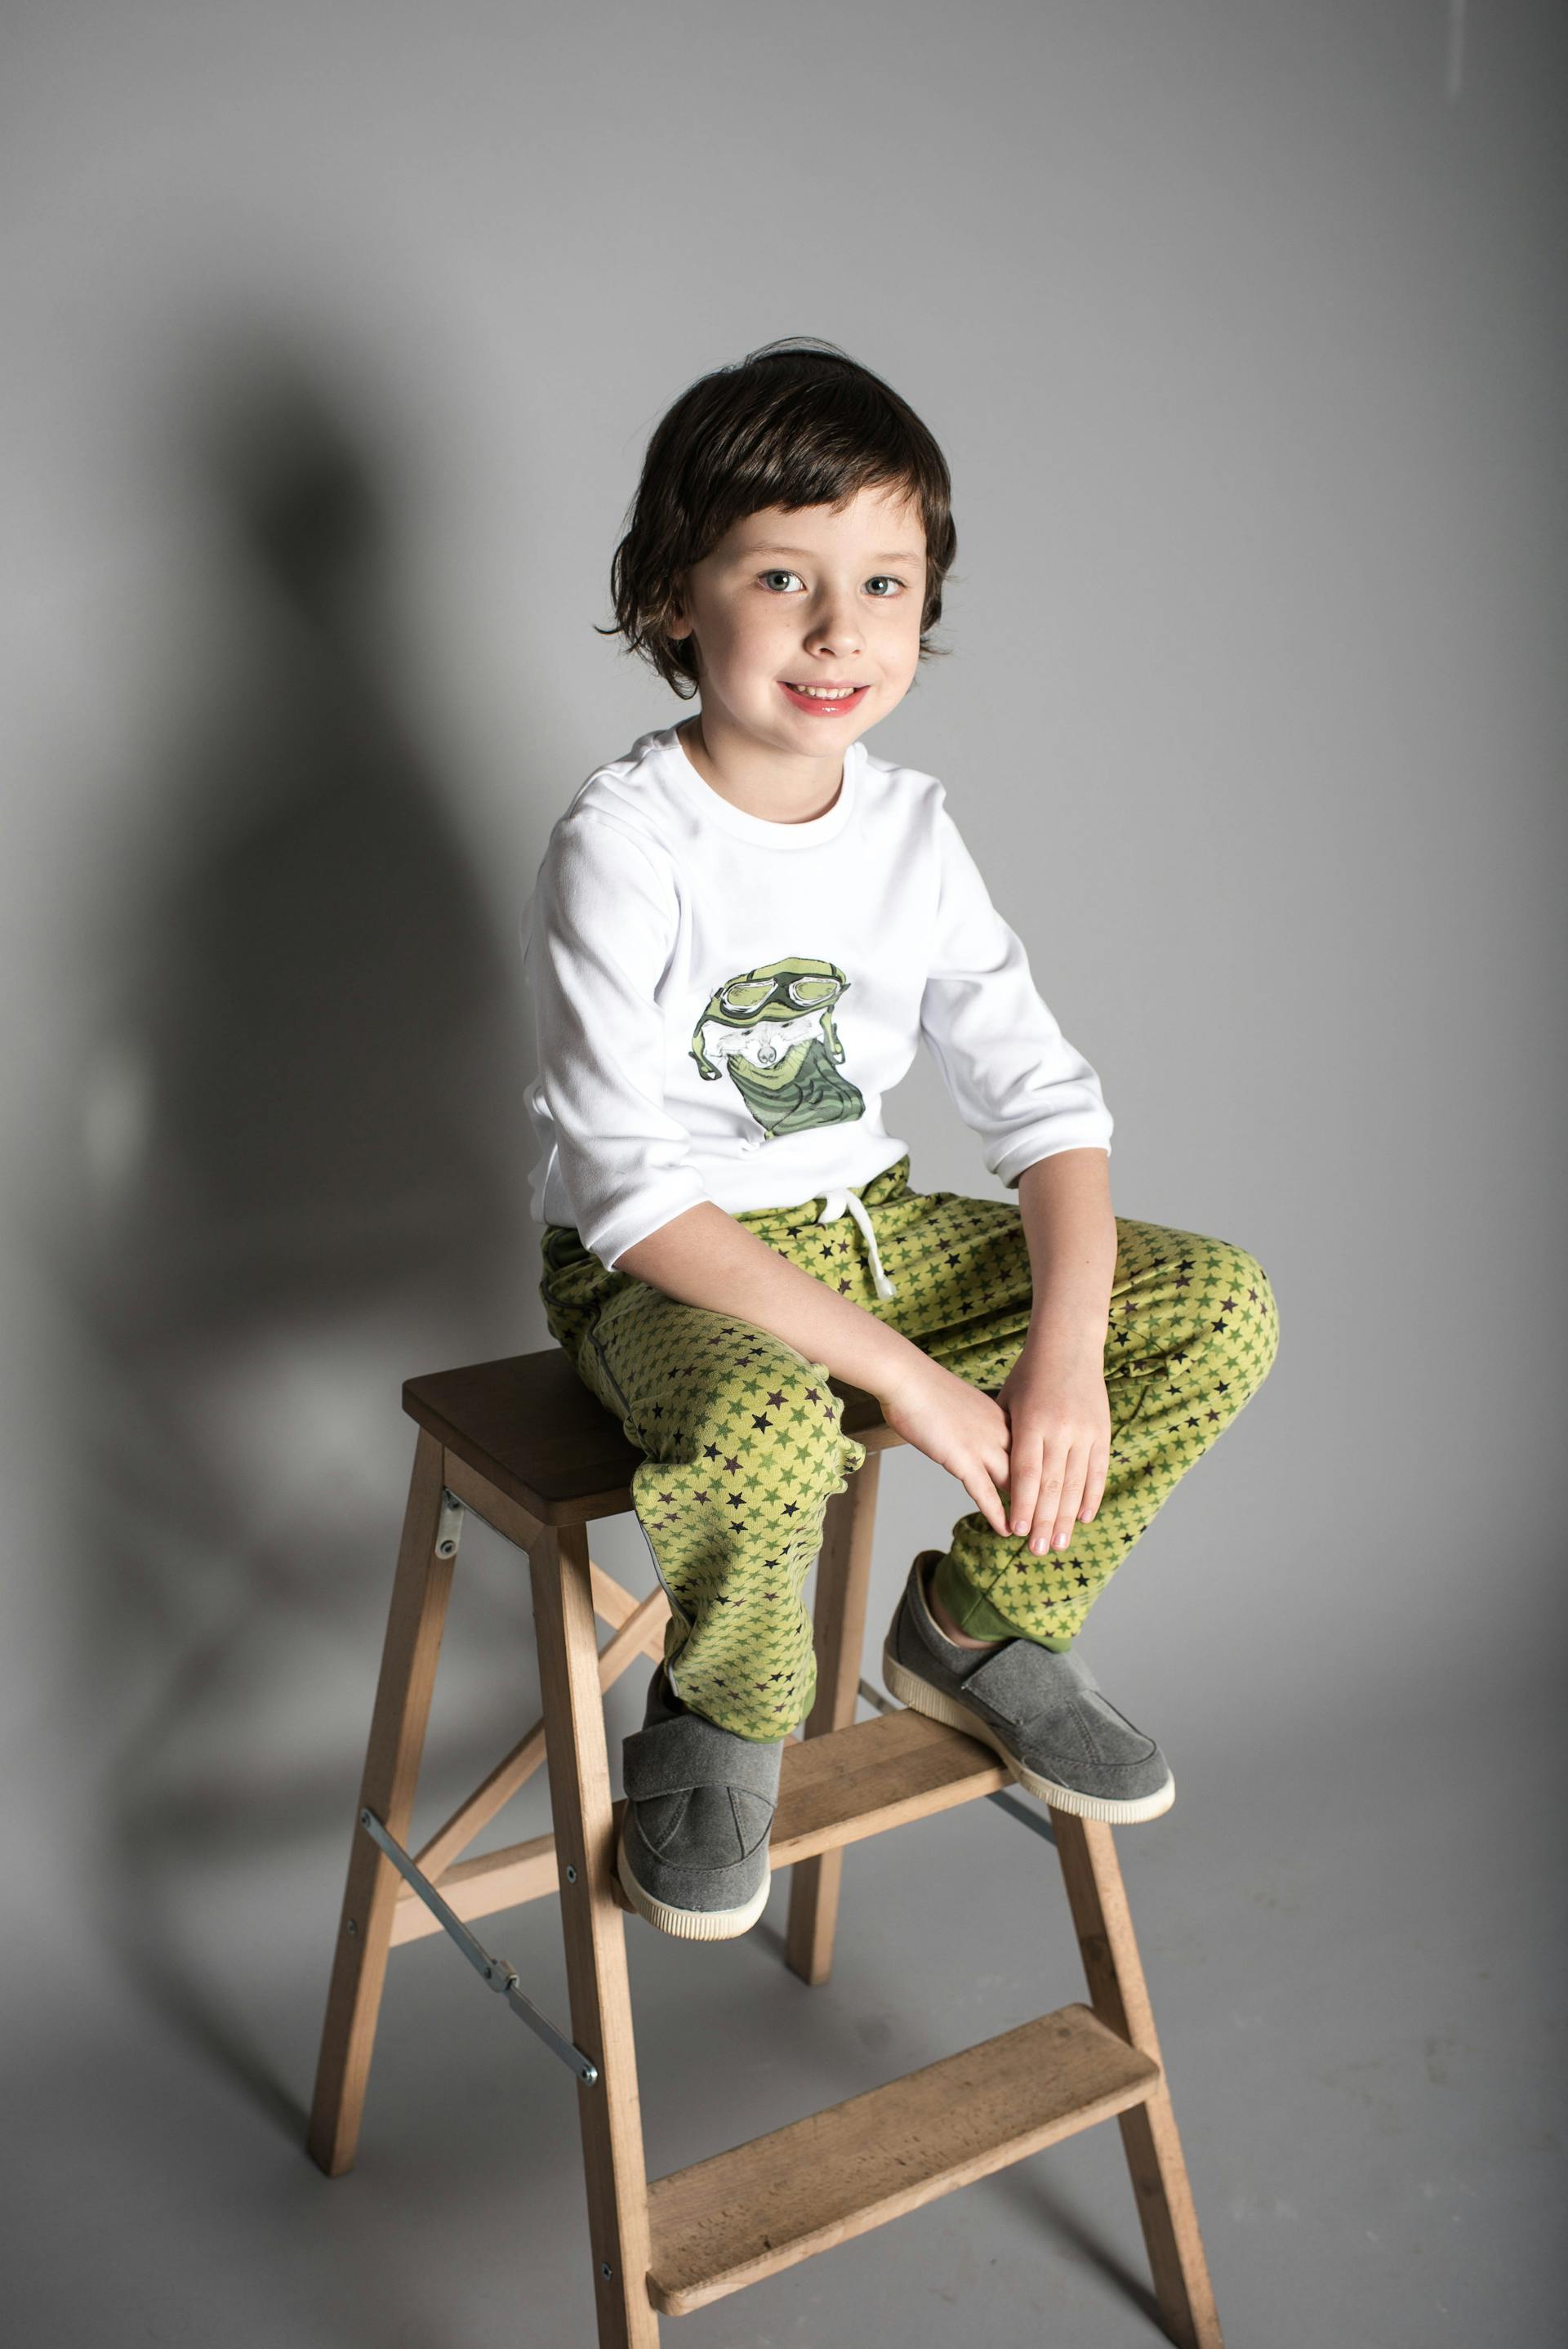 A smiling little boy sitting on a stool | Source: Pexels